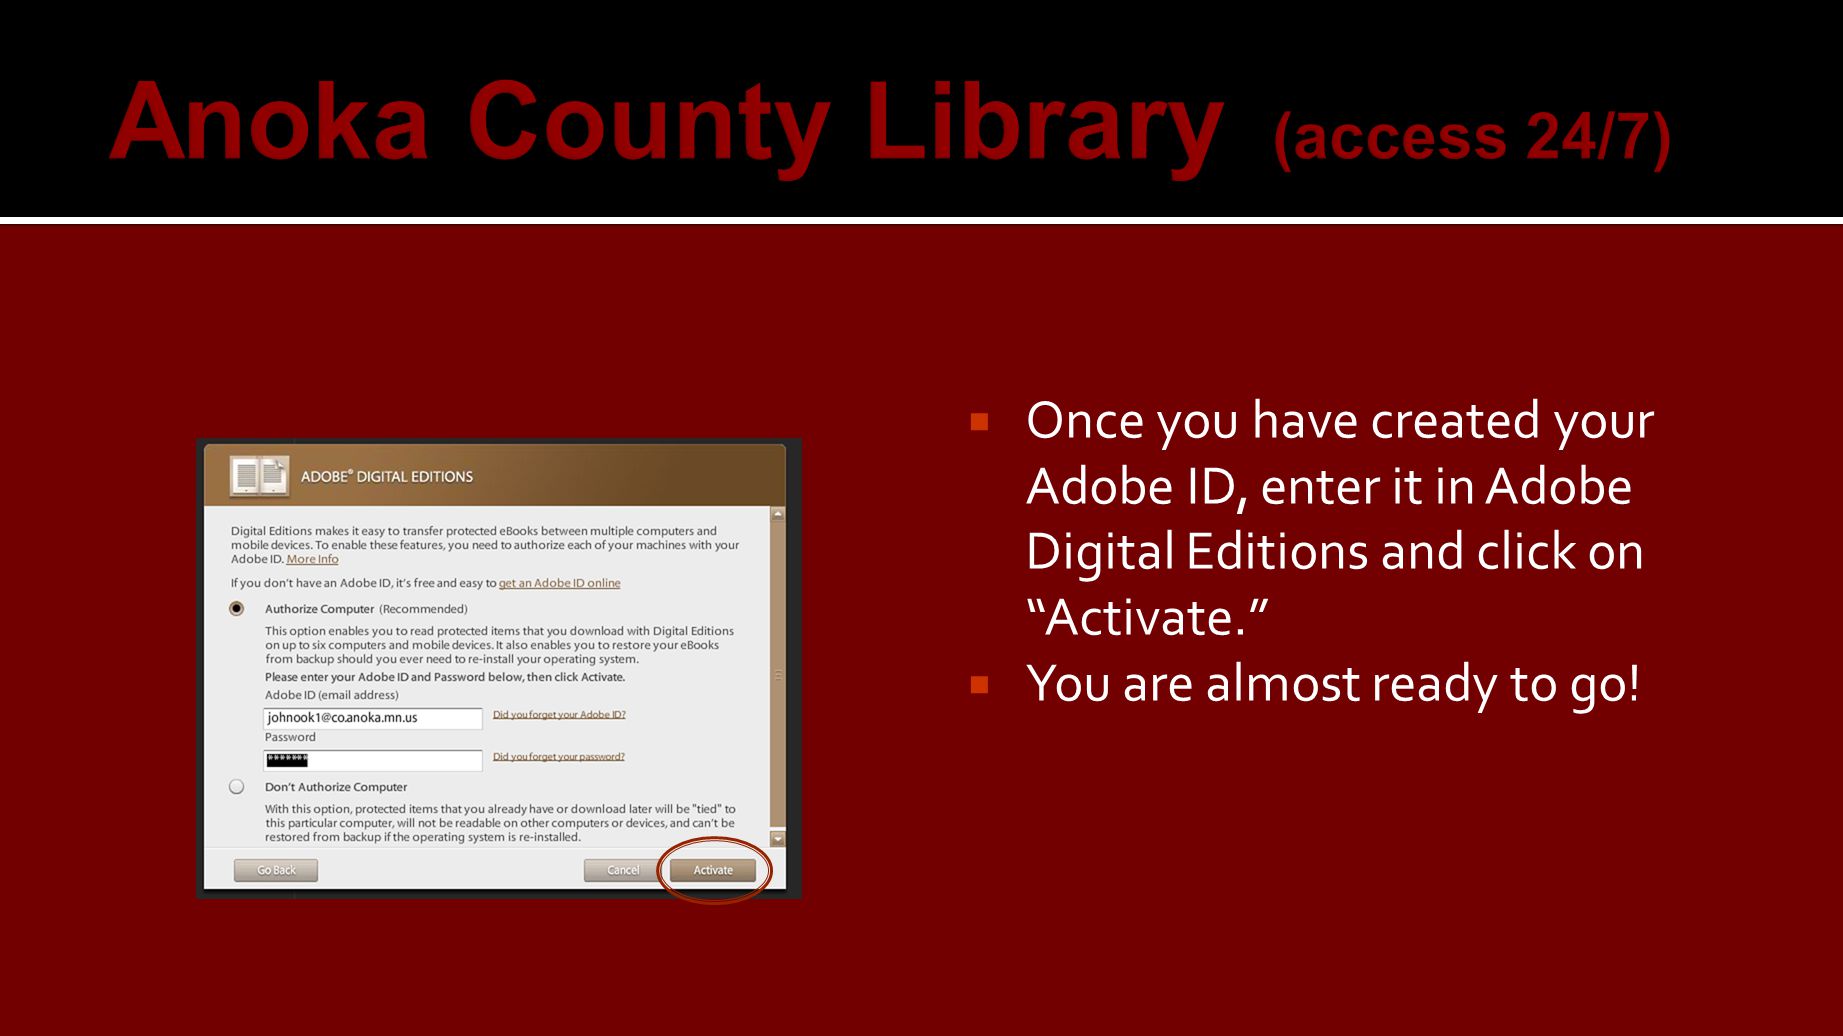  Once you have created your Adobe ID, enter it in Adobe Digital Editions and click on Activate.  You are almost ready to go!